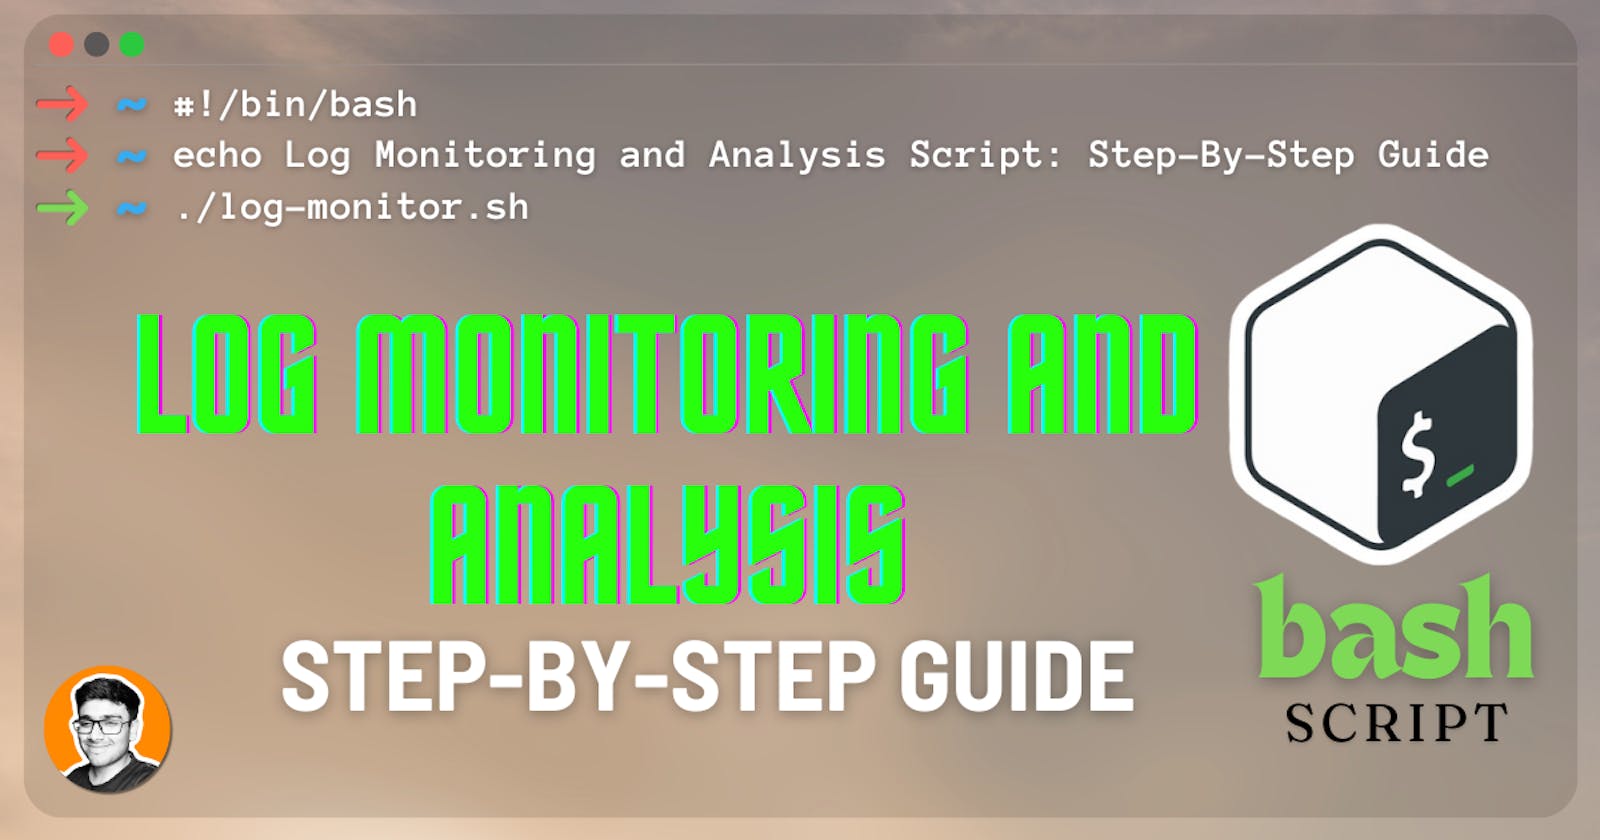 Log Monitoring and Analysis using Bash Script: Step-By-Step Guide